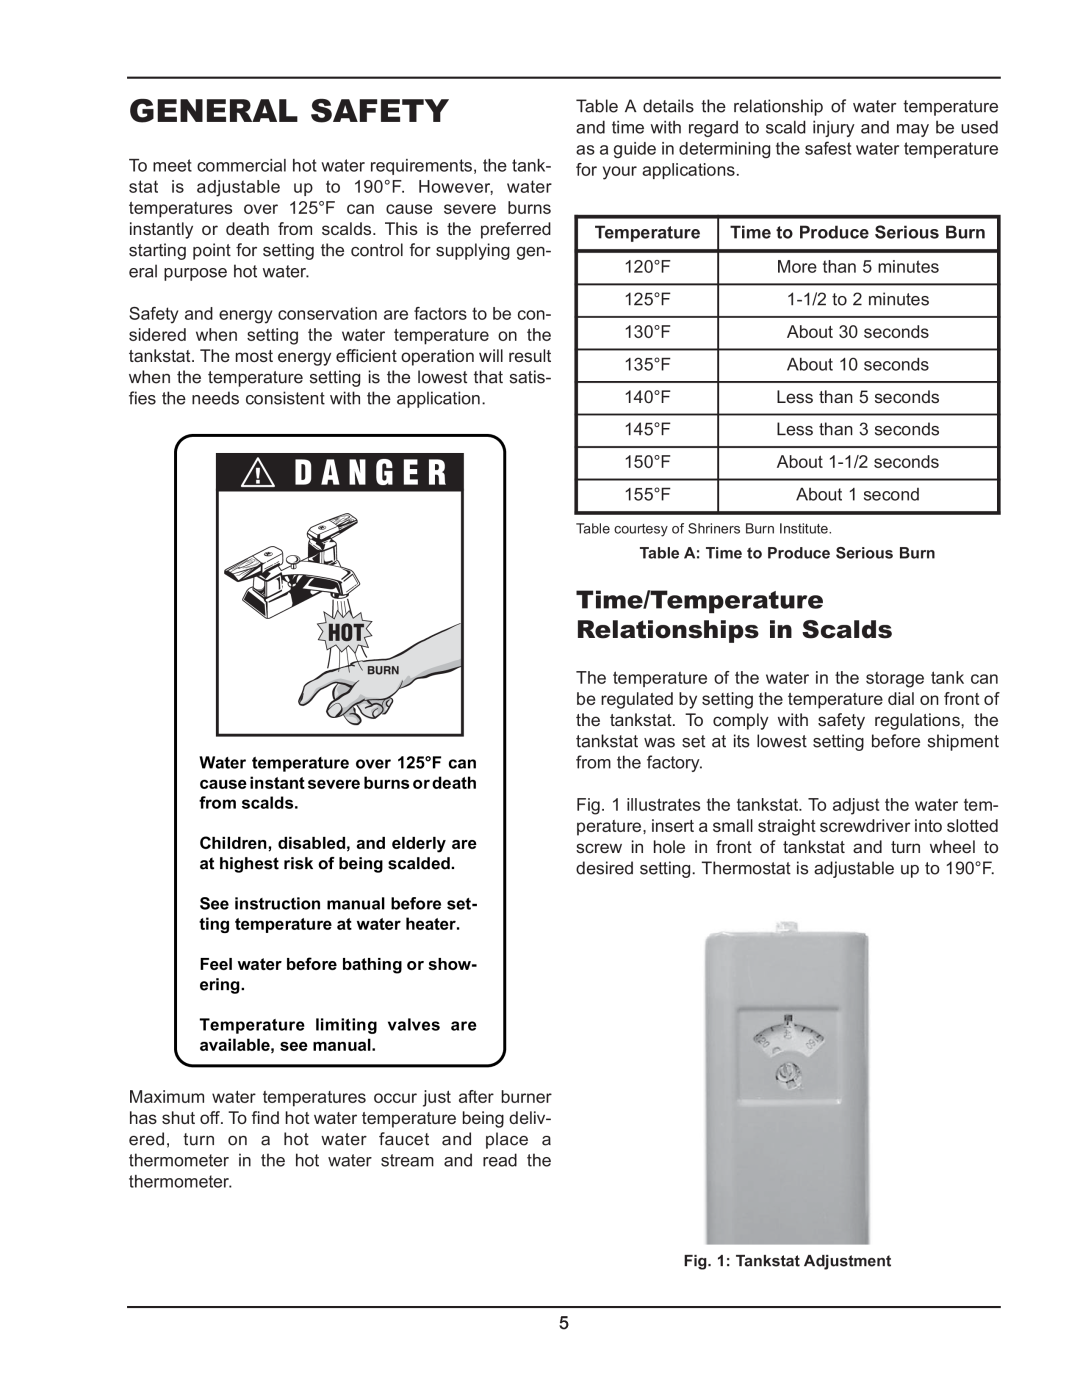 Raypak 2600401 General Safety, Time/Temperature Relationships in Scalds, Feel water before bathing or show- ering 